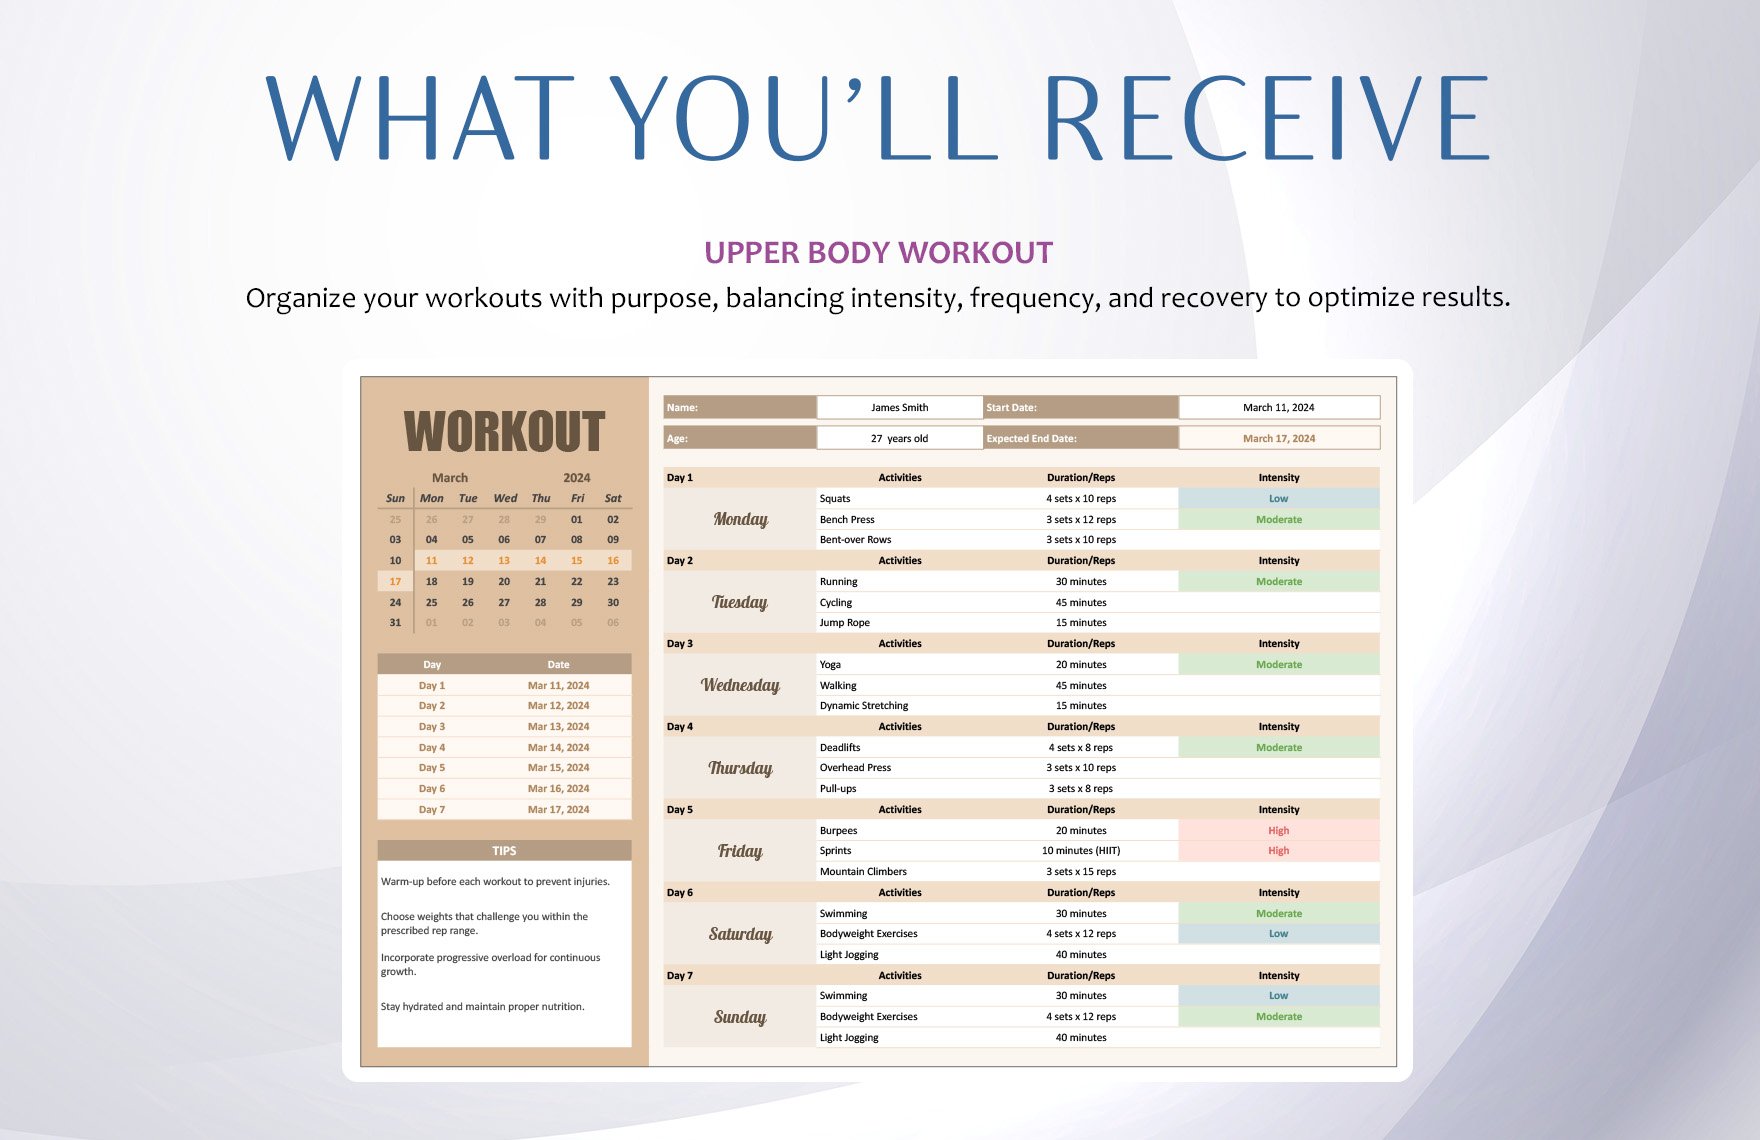 Transformation Workout Template